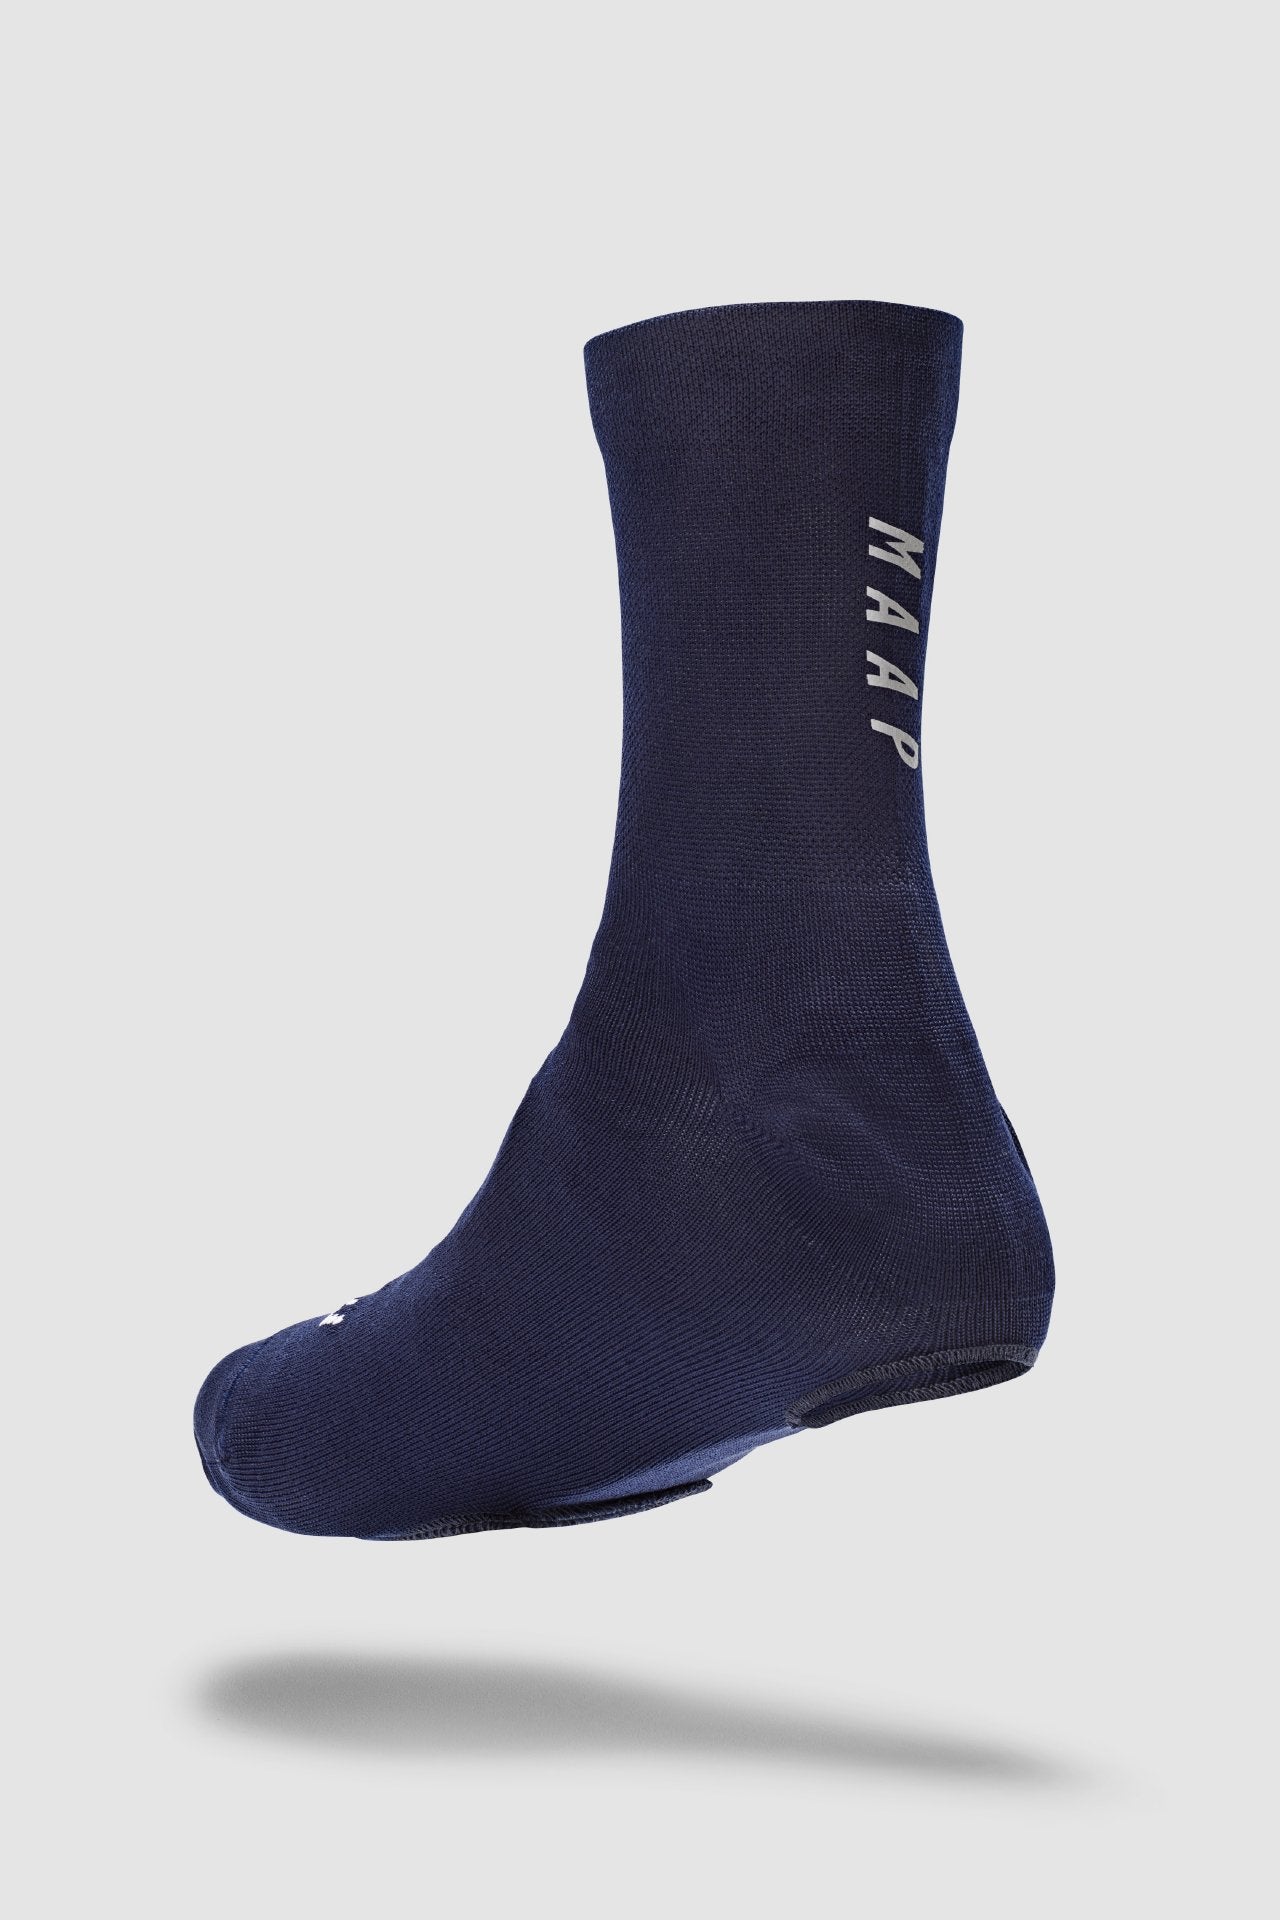 MAAP Knitted Oversock - Navy